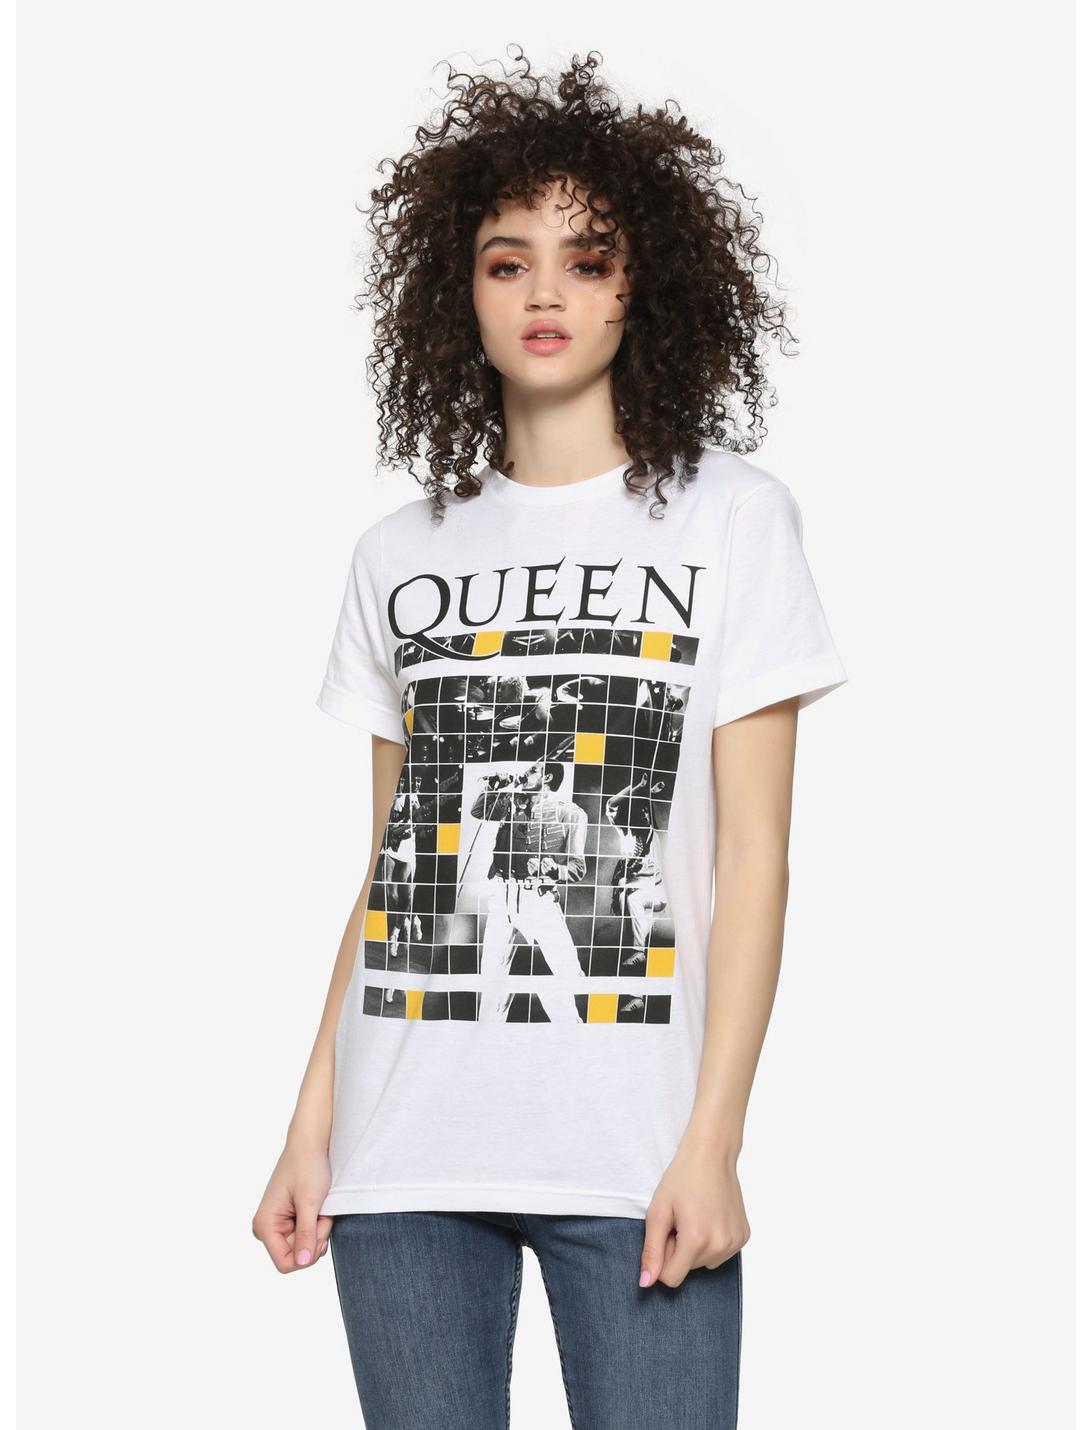 Queen Squares Girls T-Shirt, WHITE, hi-res